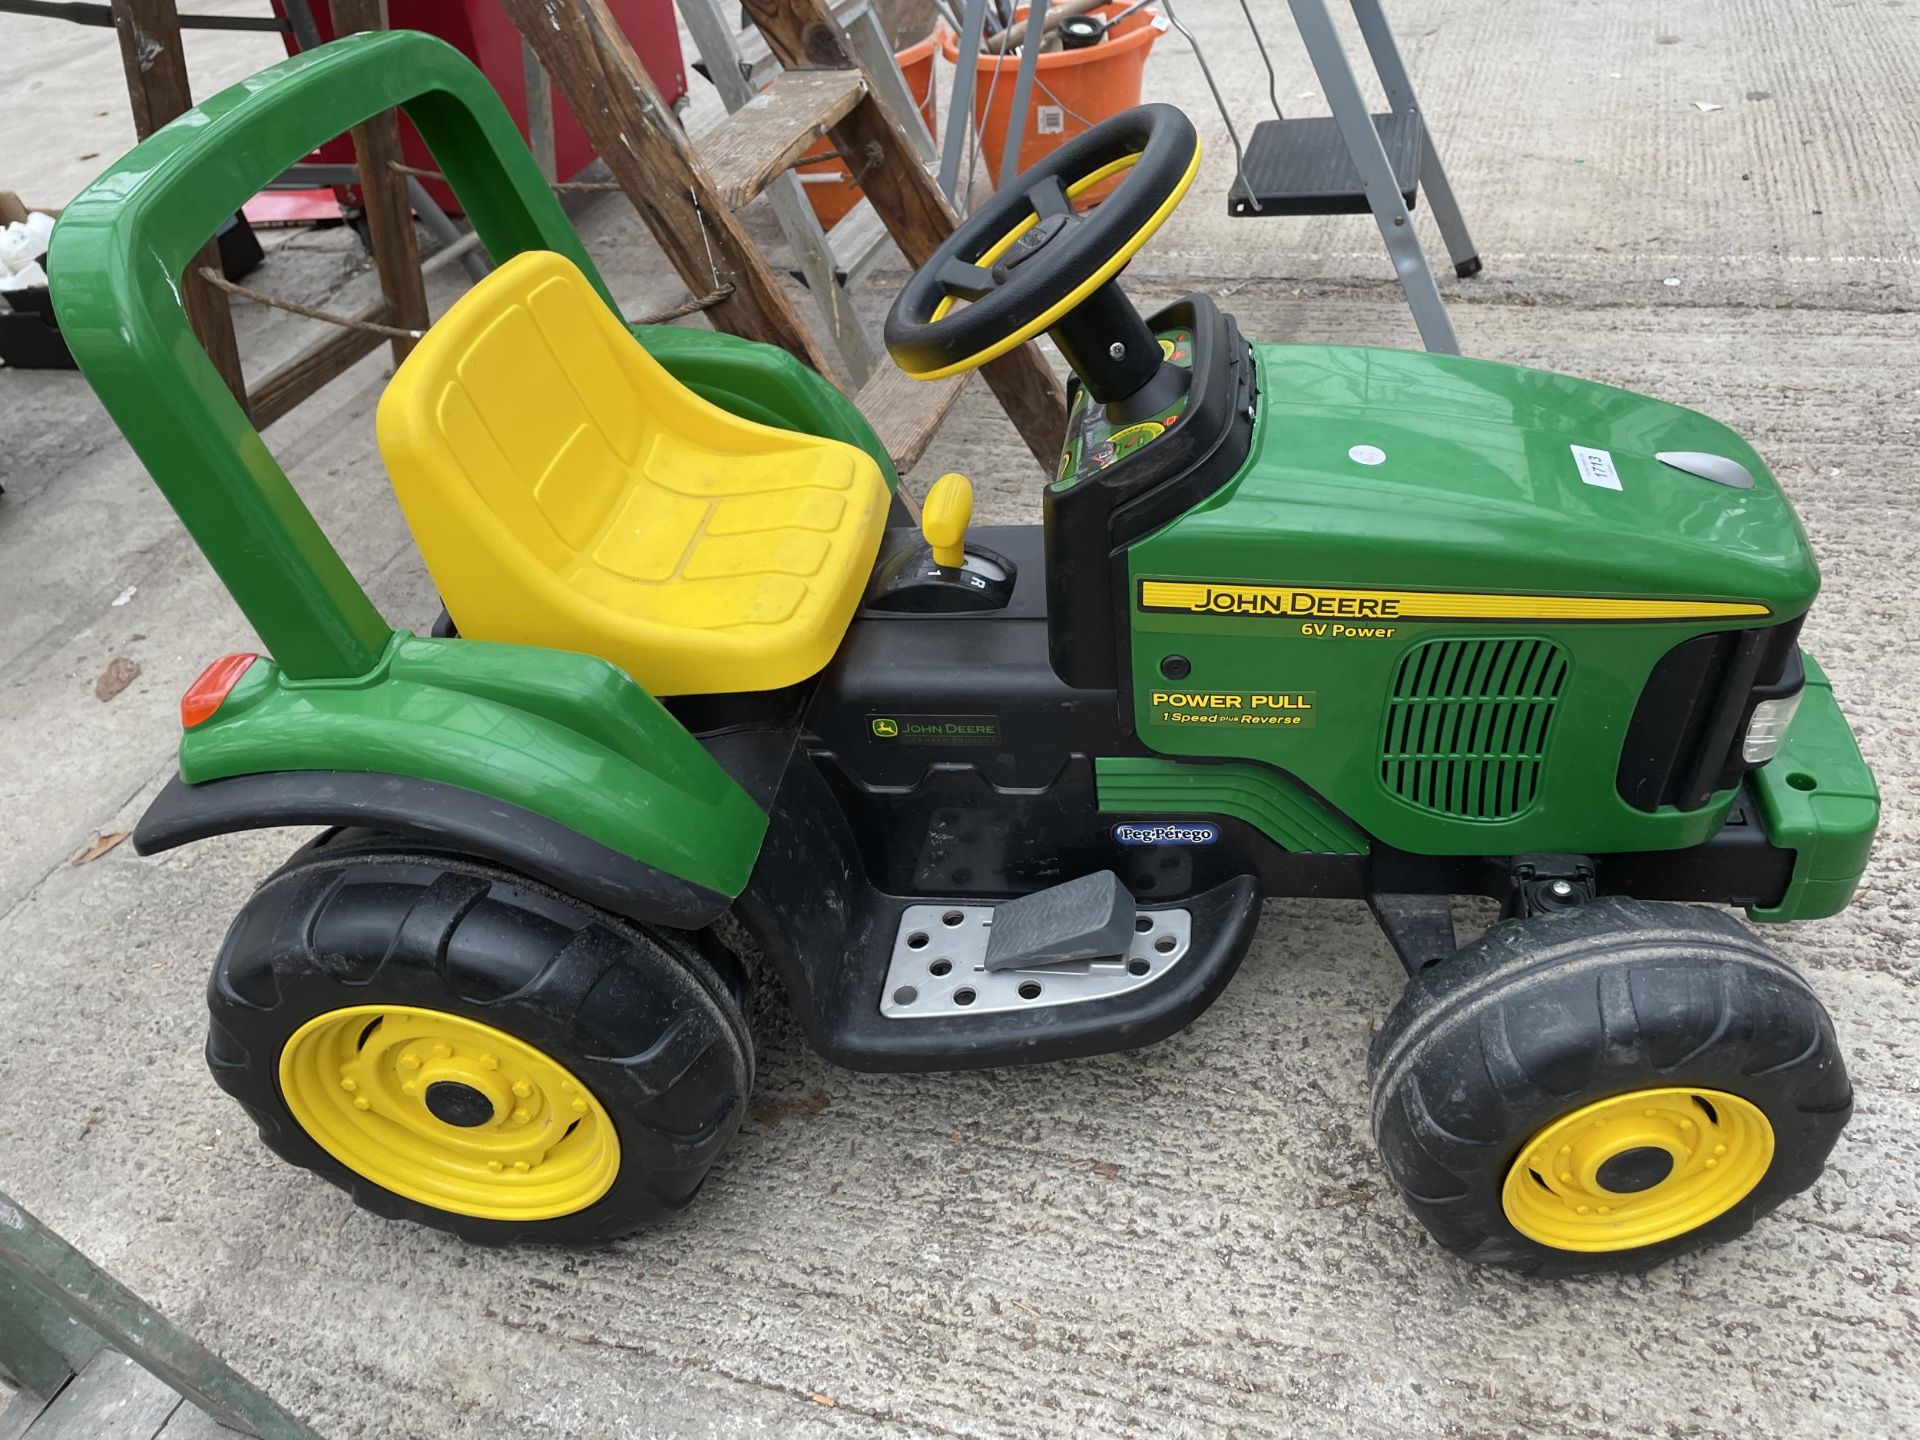 A JOHN DEERE POWER PULL RIDE ALONG ELECTRIC CHILDS TRACTOR